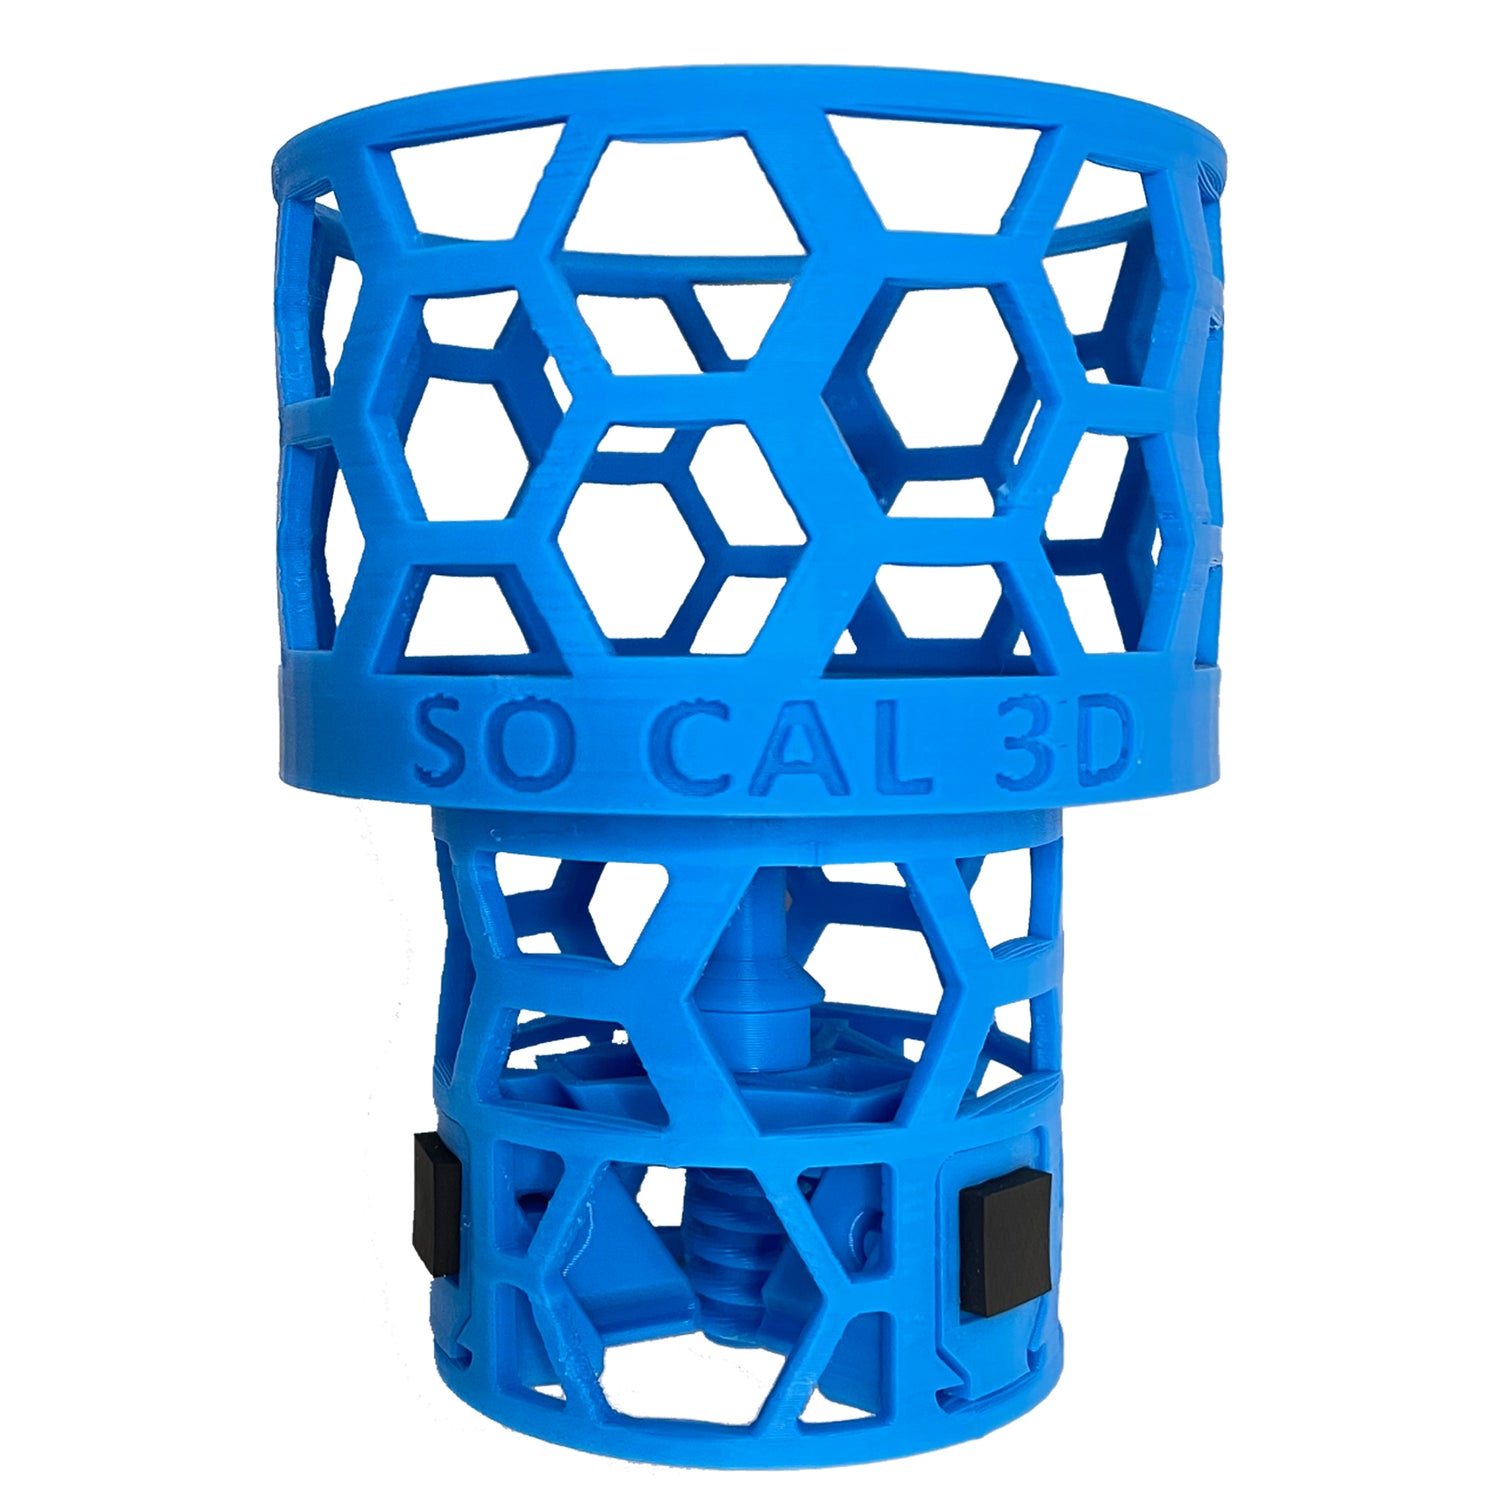 Cup Holder Adapter 3D Printed Works With 32oz & 40oz Hydroflasks